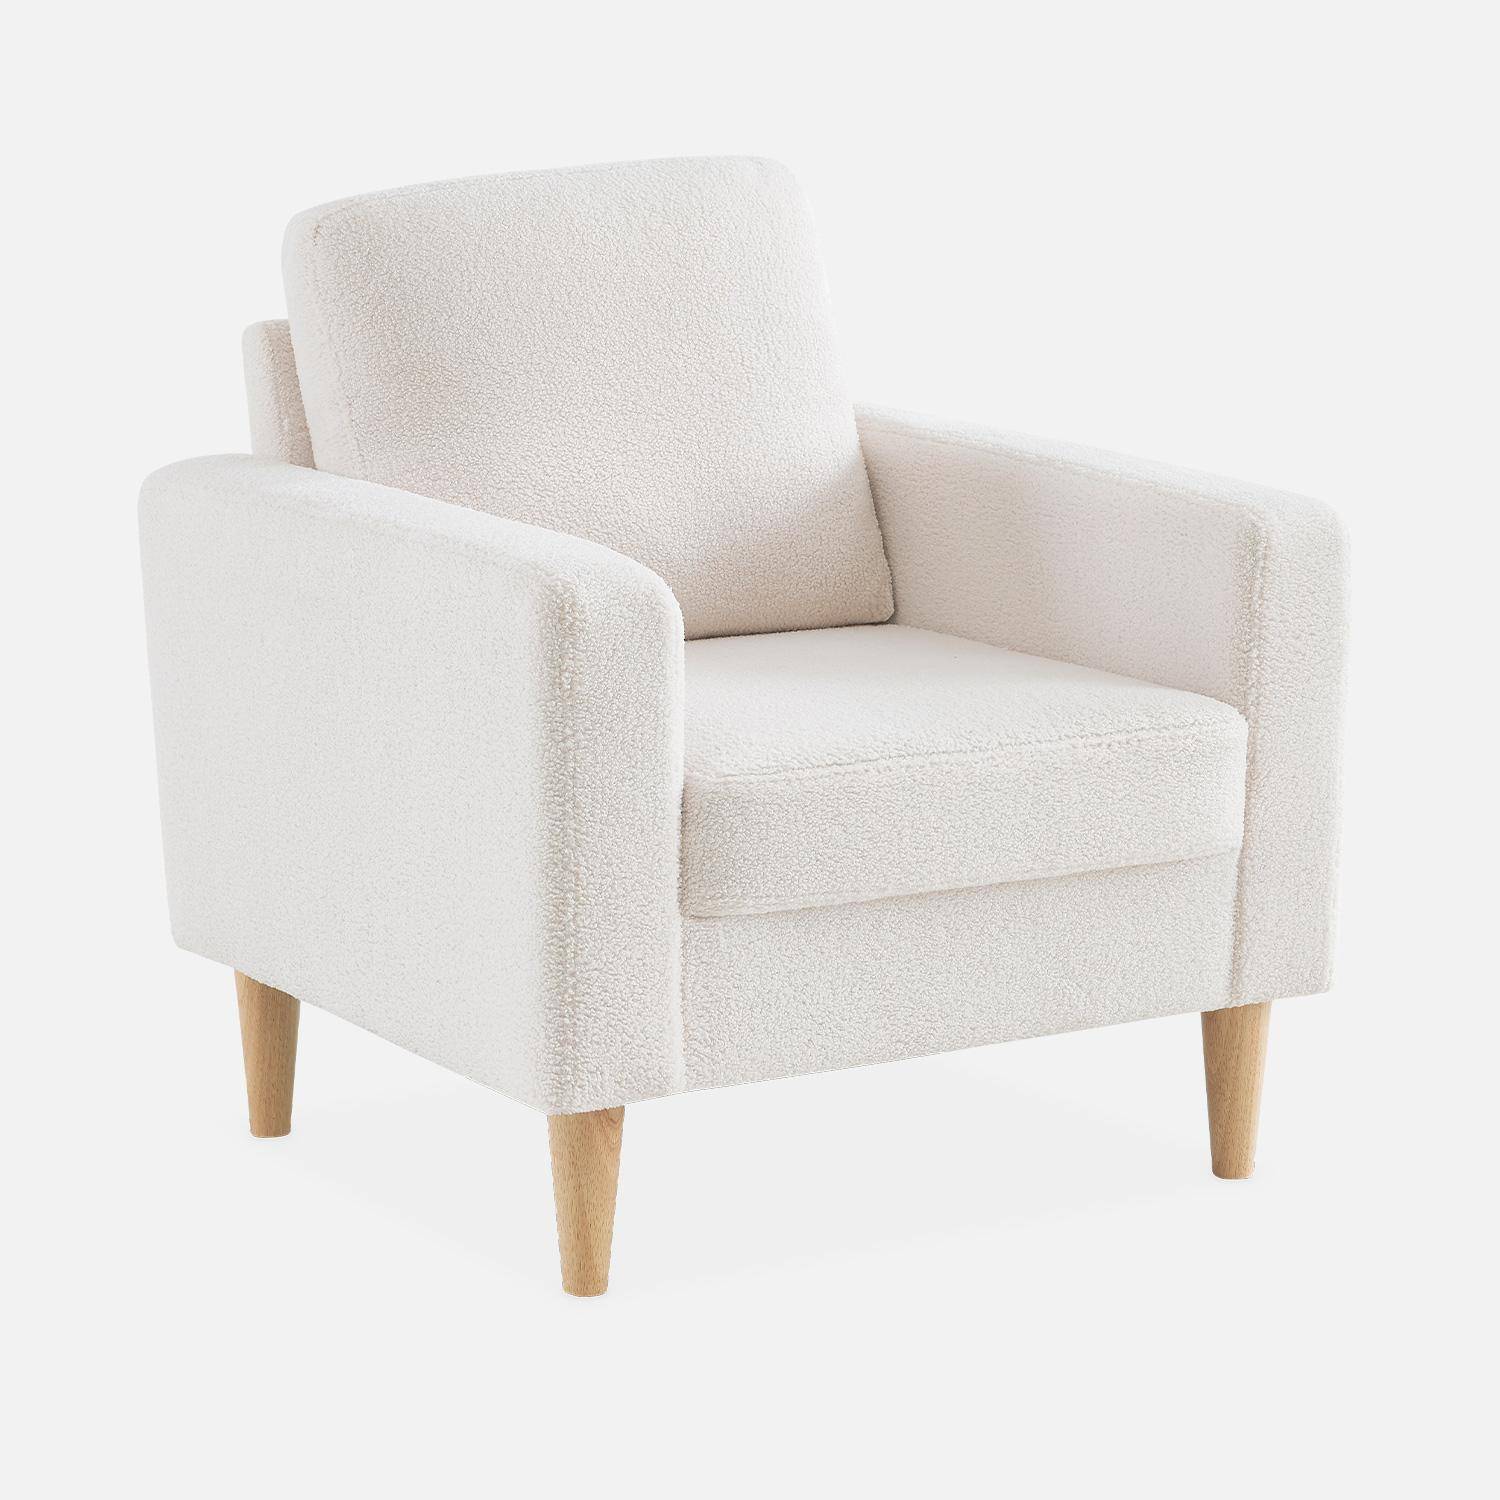 3-seater sofa Scandi-style and armchair with wooden legs, white boucle, Bjorn duo Photo4